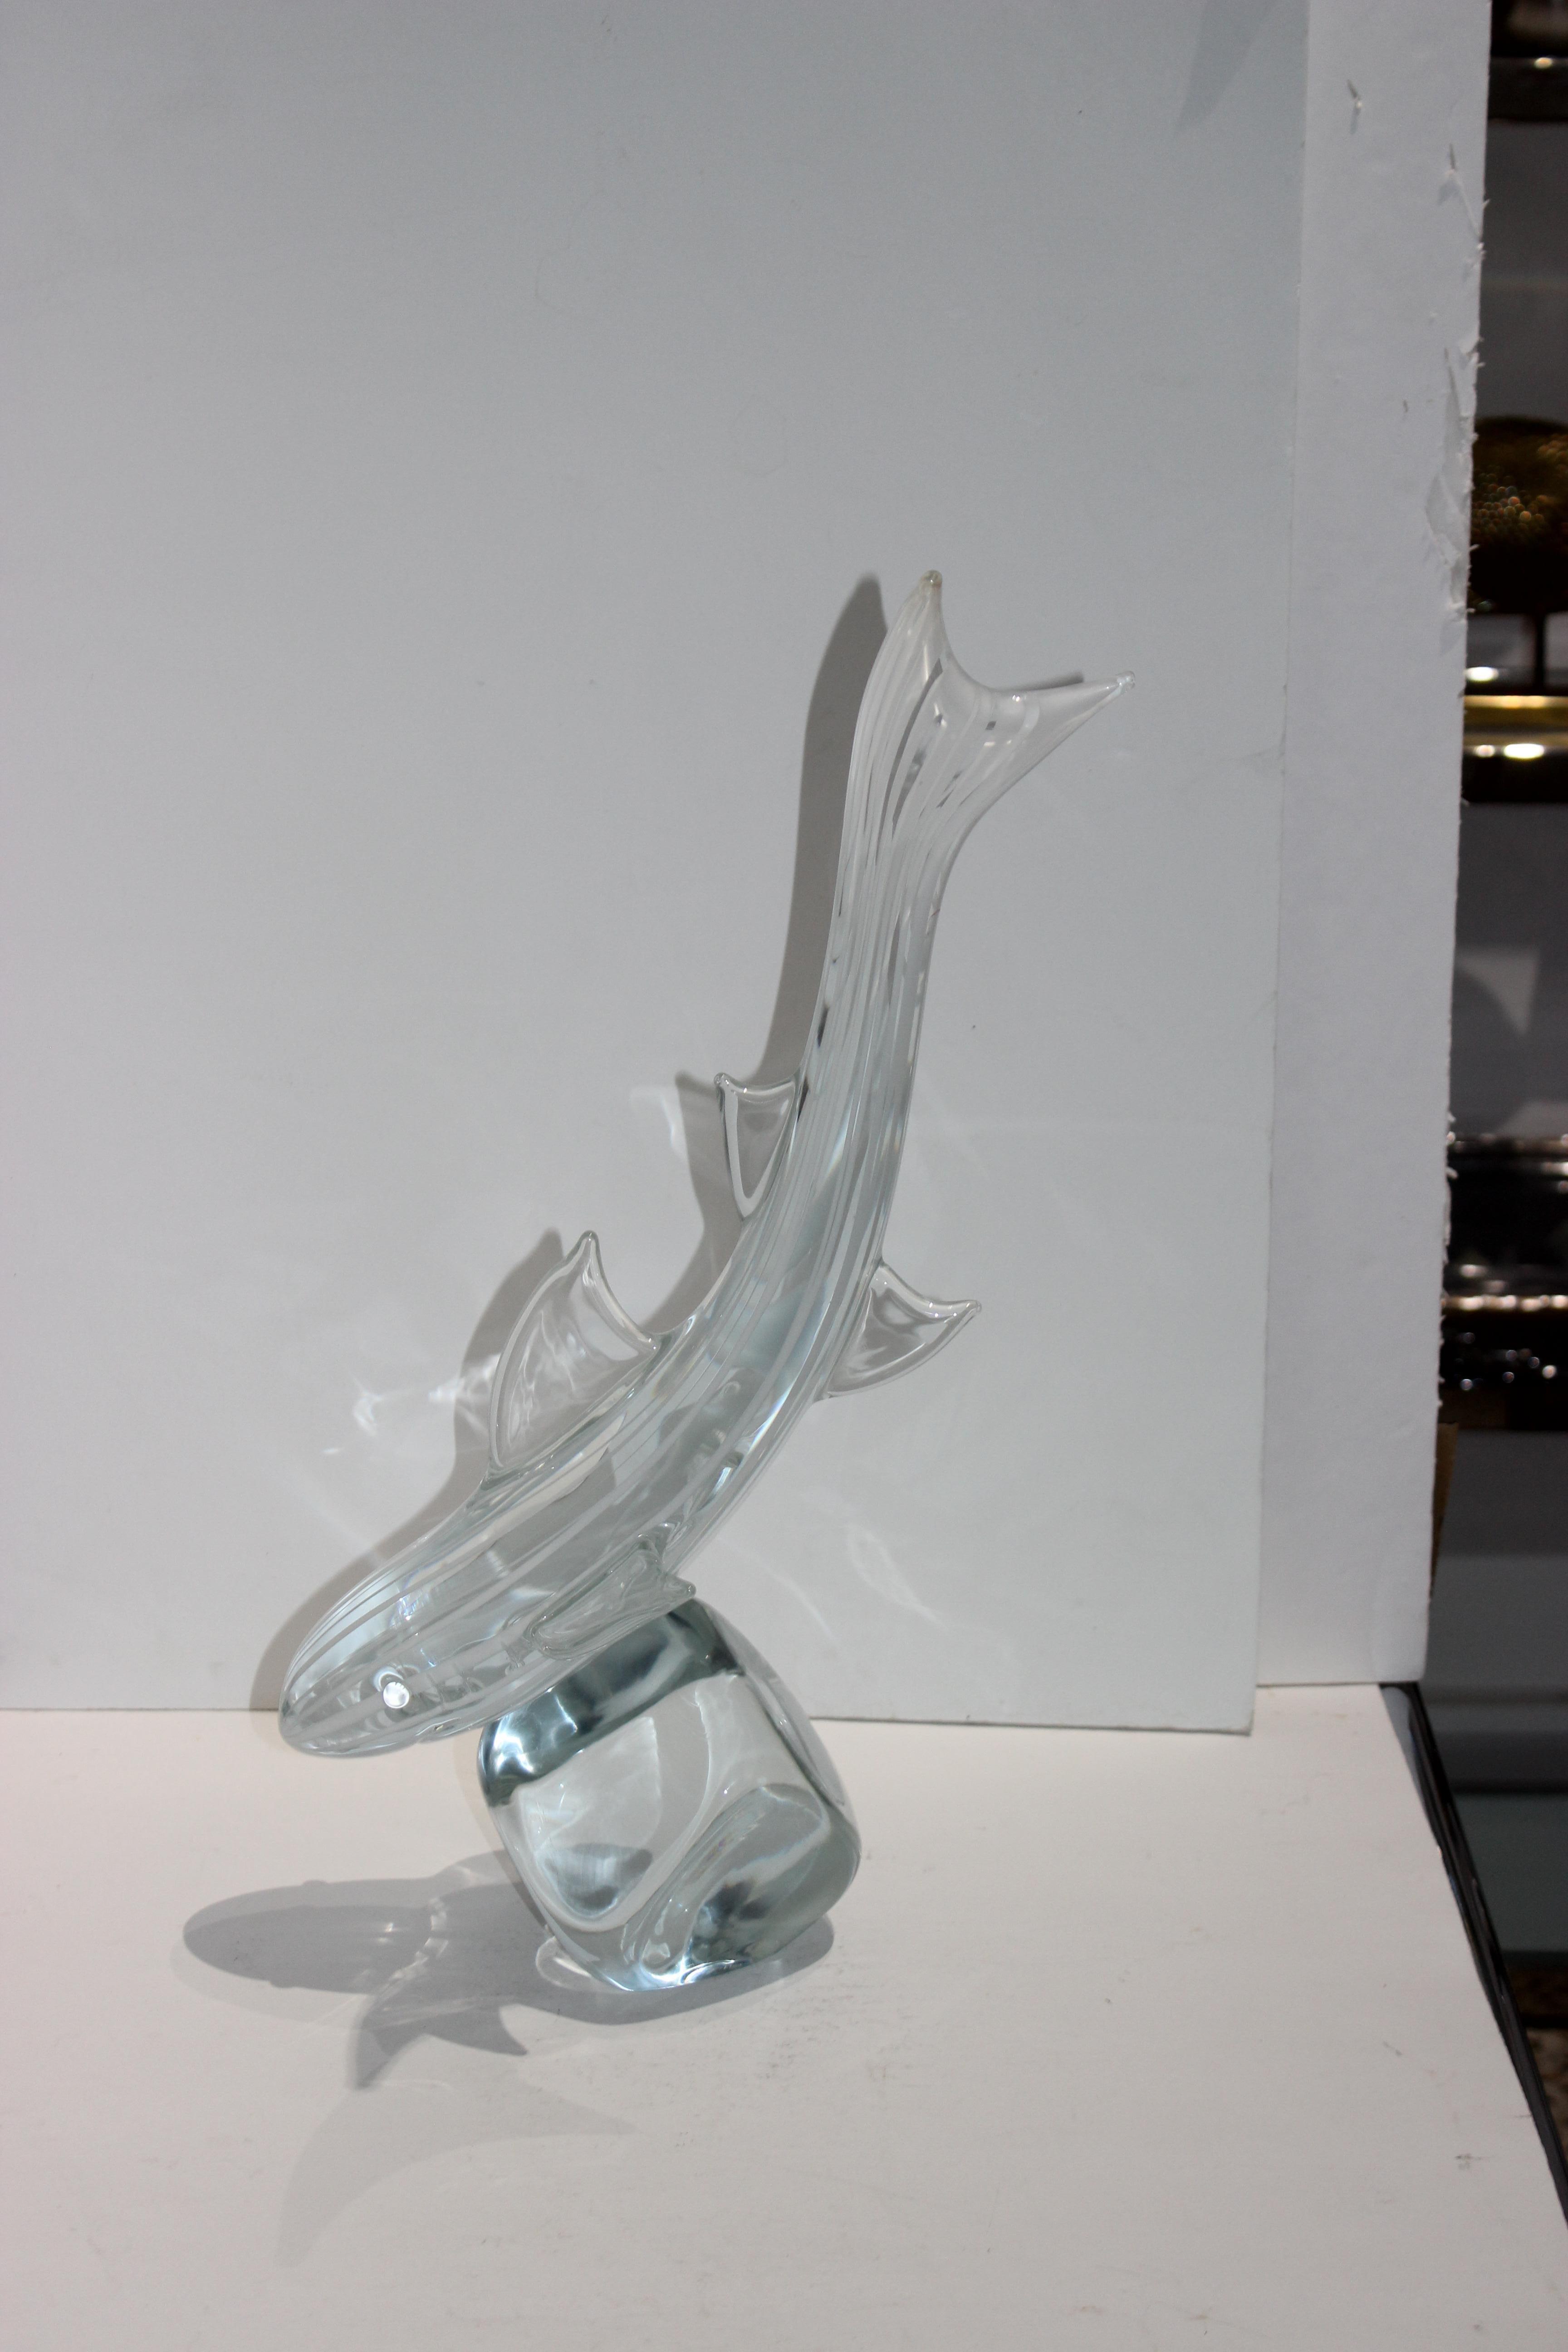 Hand-Crafted Murano Glass Sculpture of a Shark by Oggetti